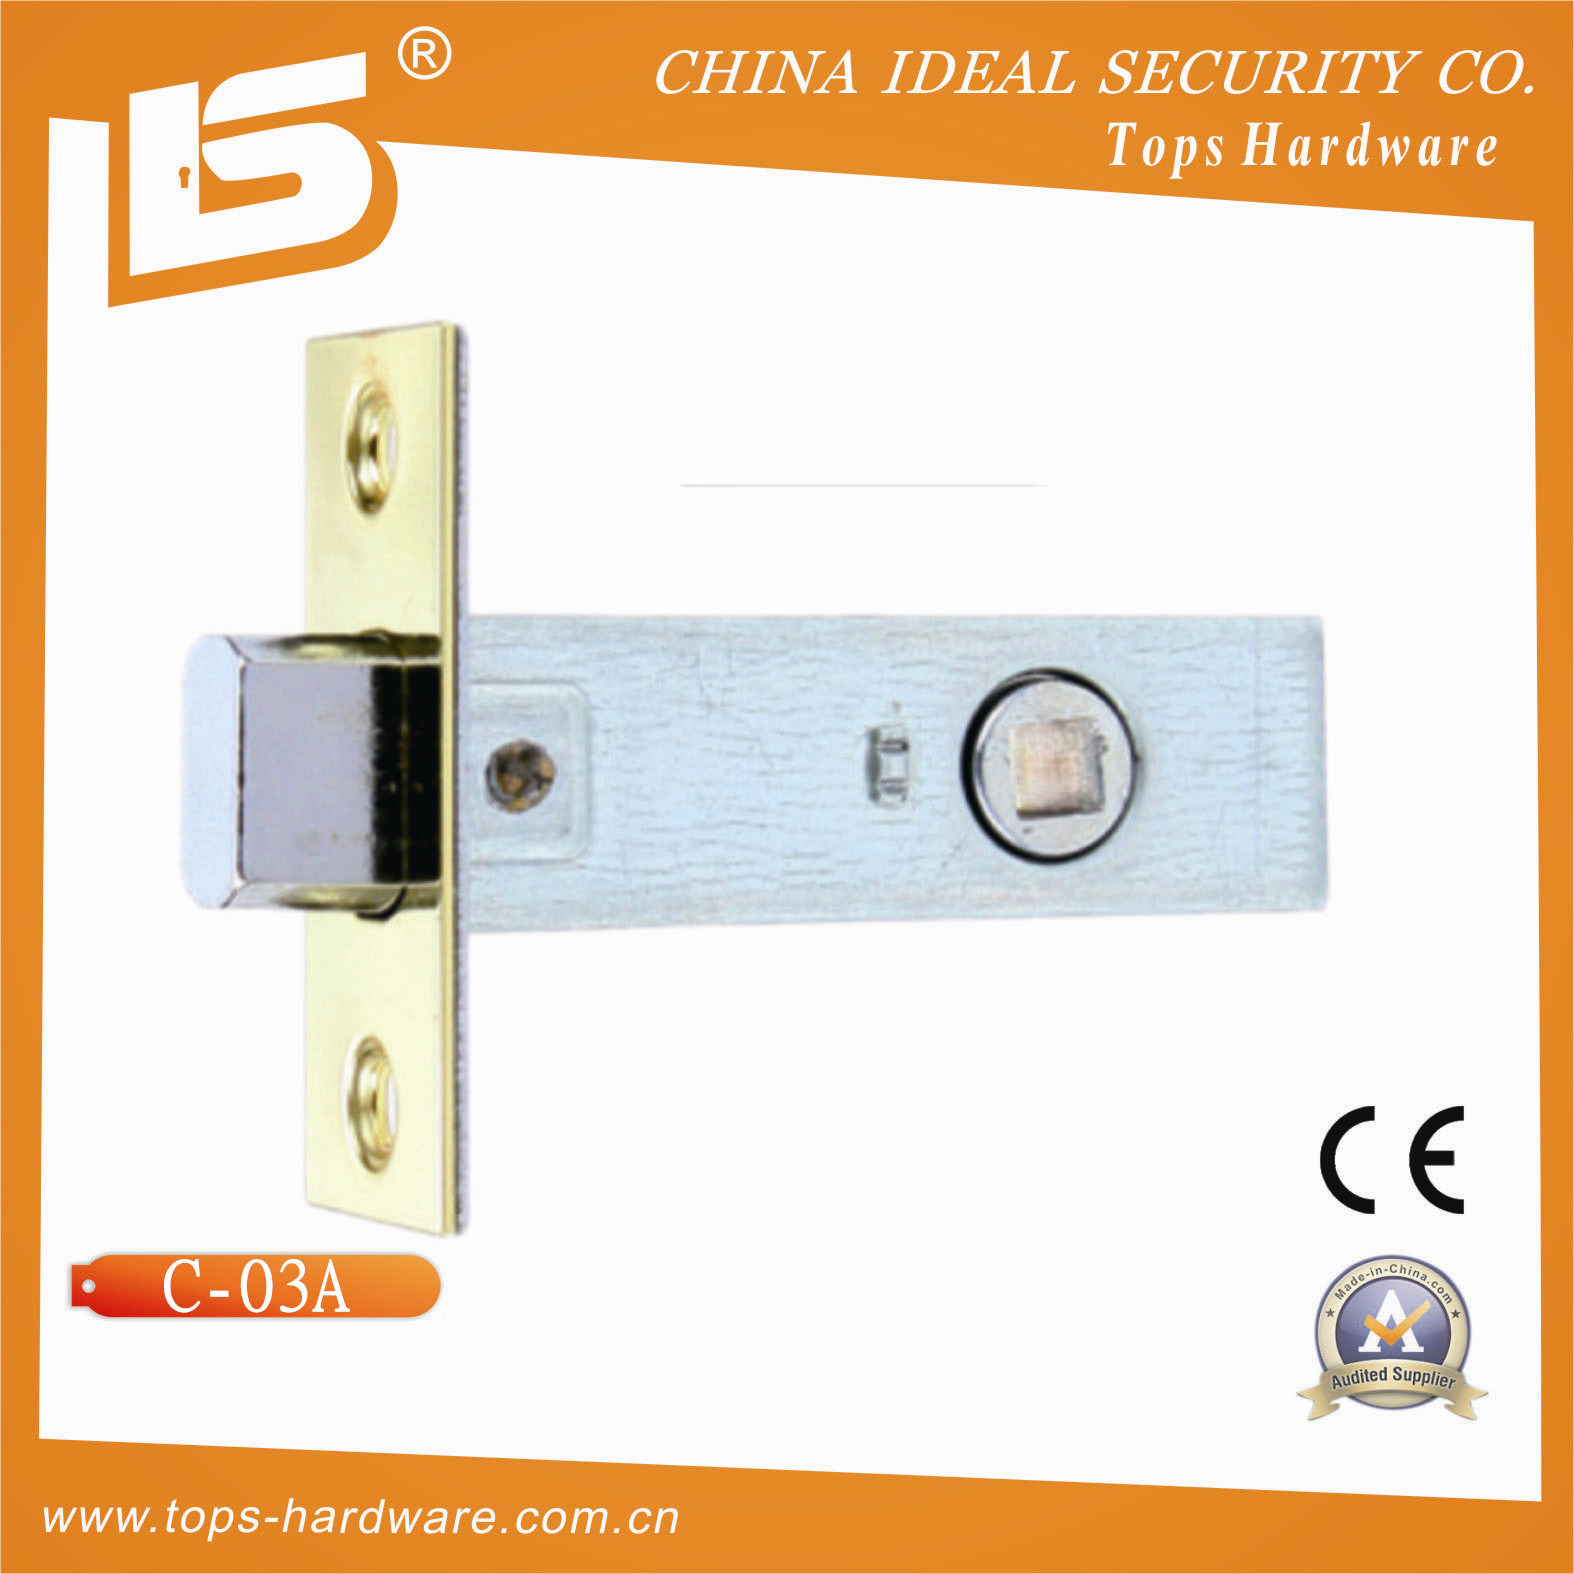 Mortise Lock Body (C-03A) with Knob